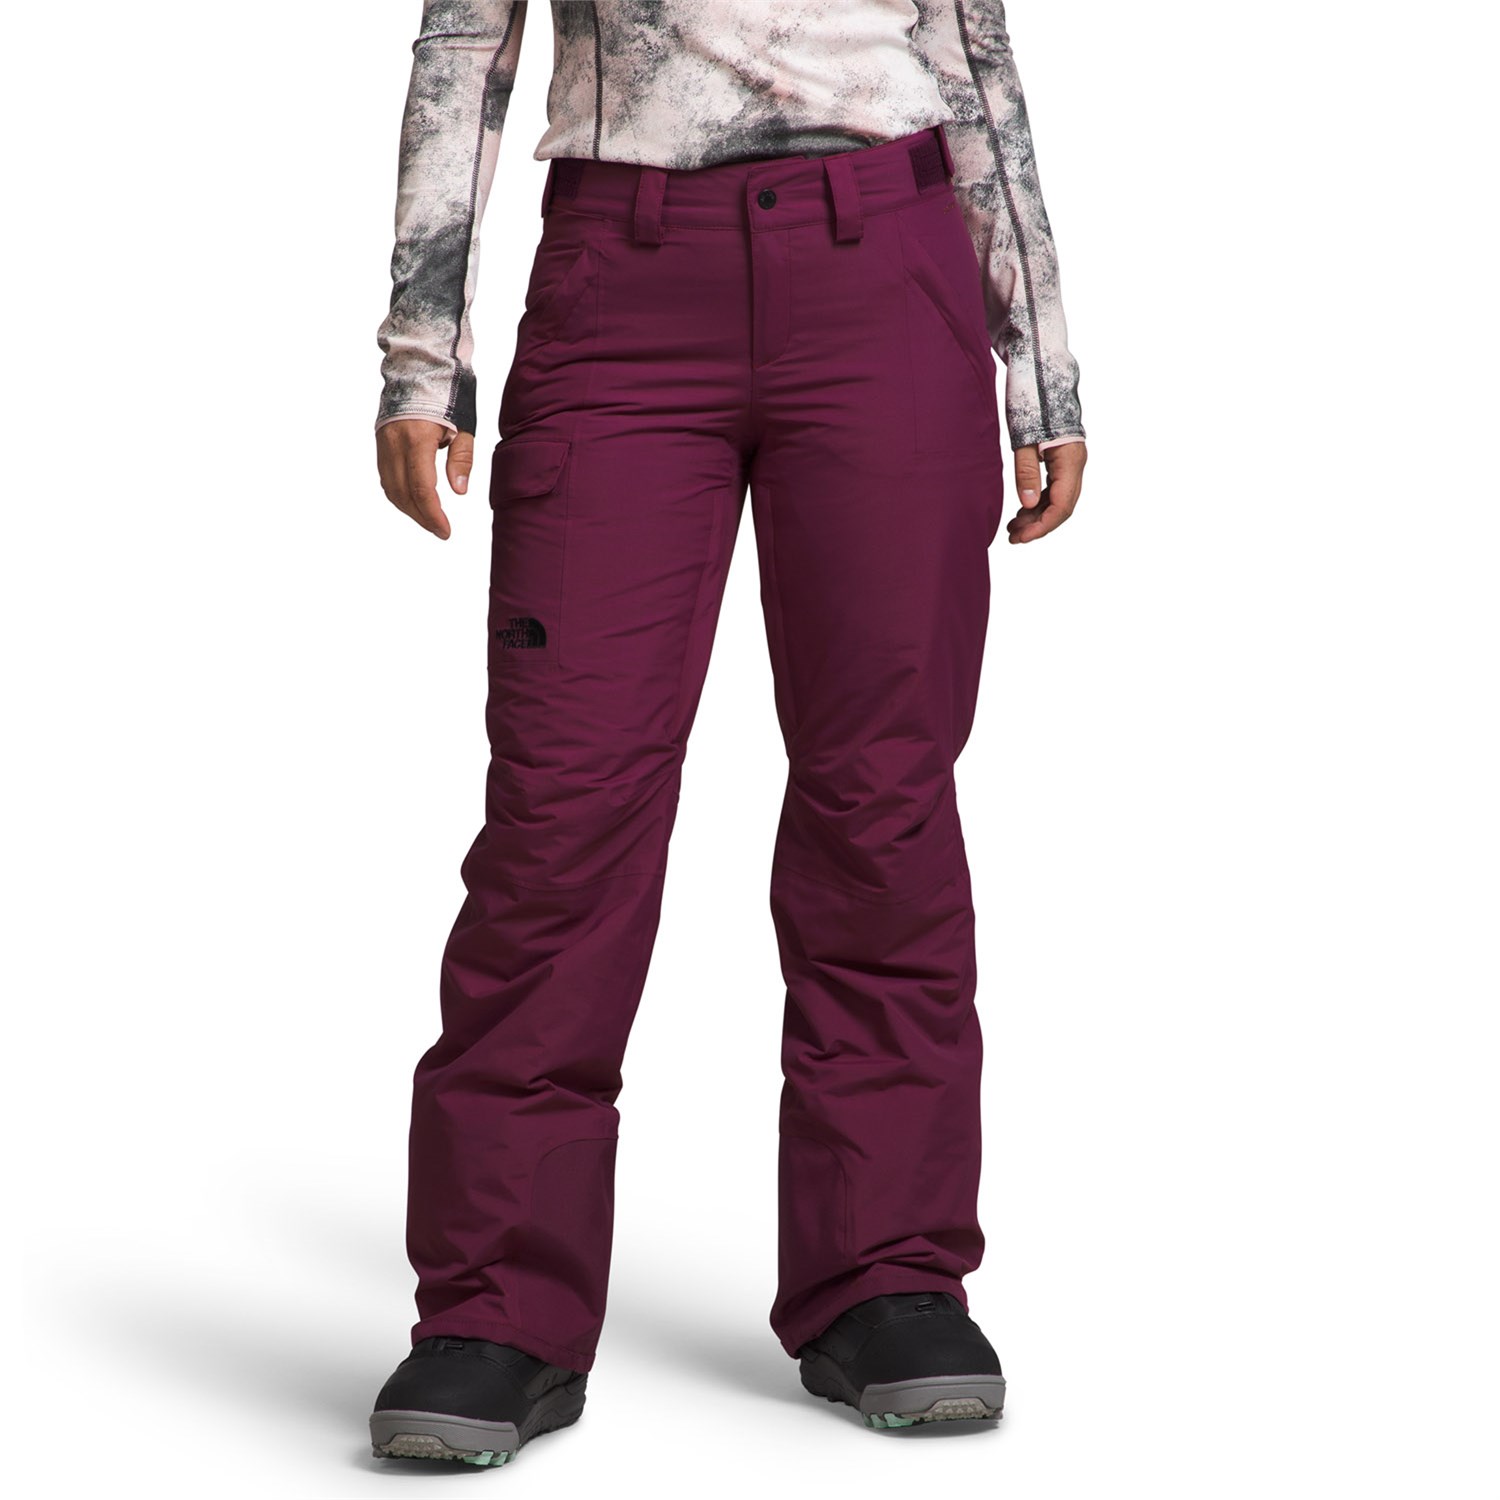 Брюки The North Face Freedom Insulated, цвет Boysenberry брюки the north face freedom insulated plus цвет boysenberry